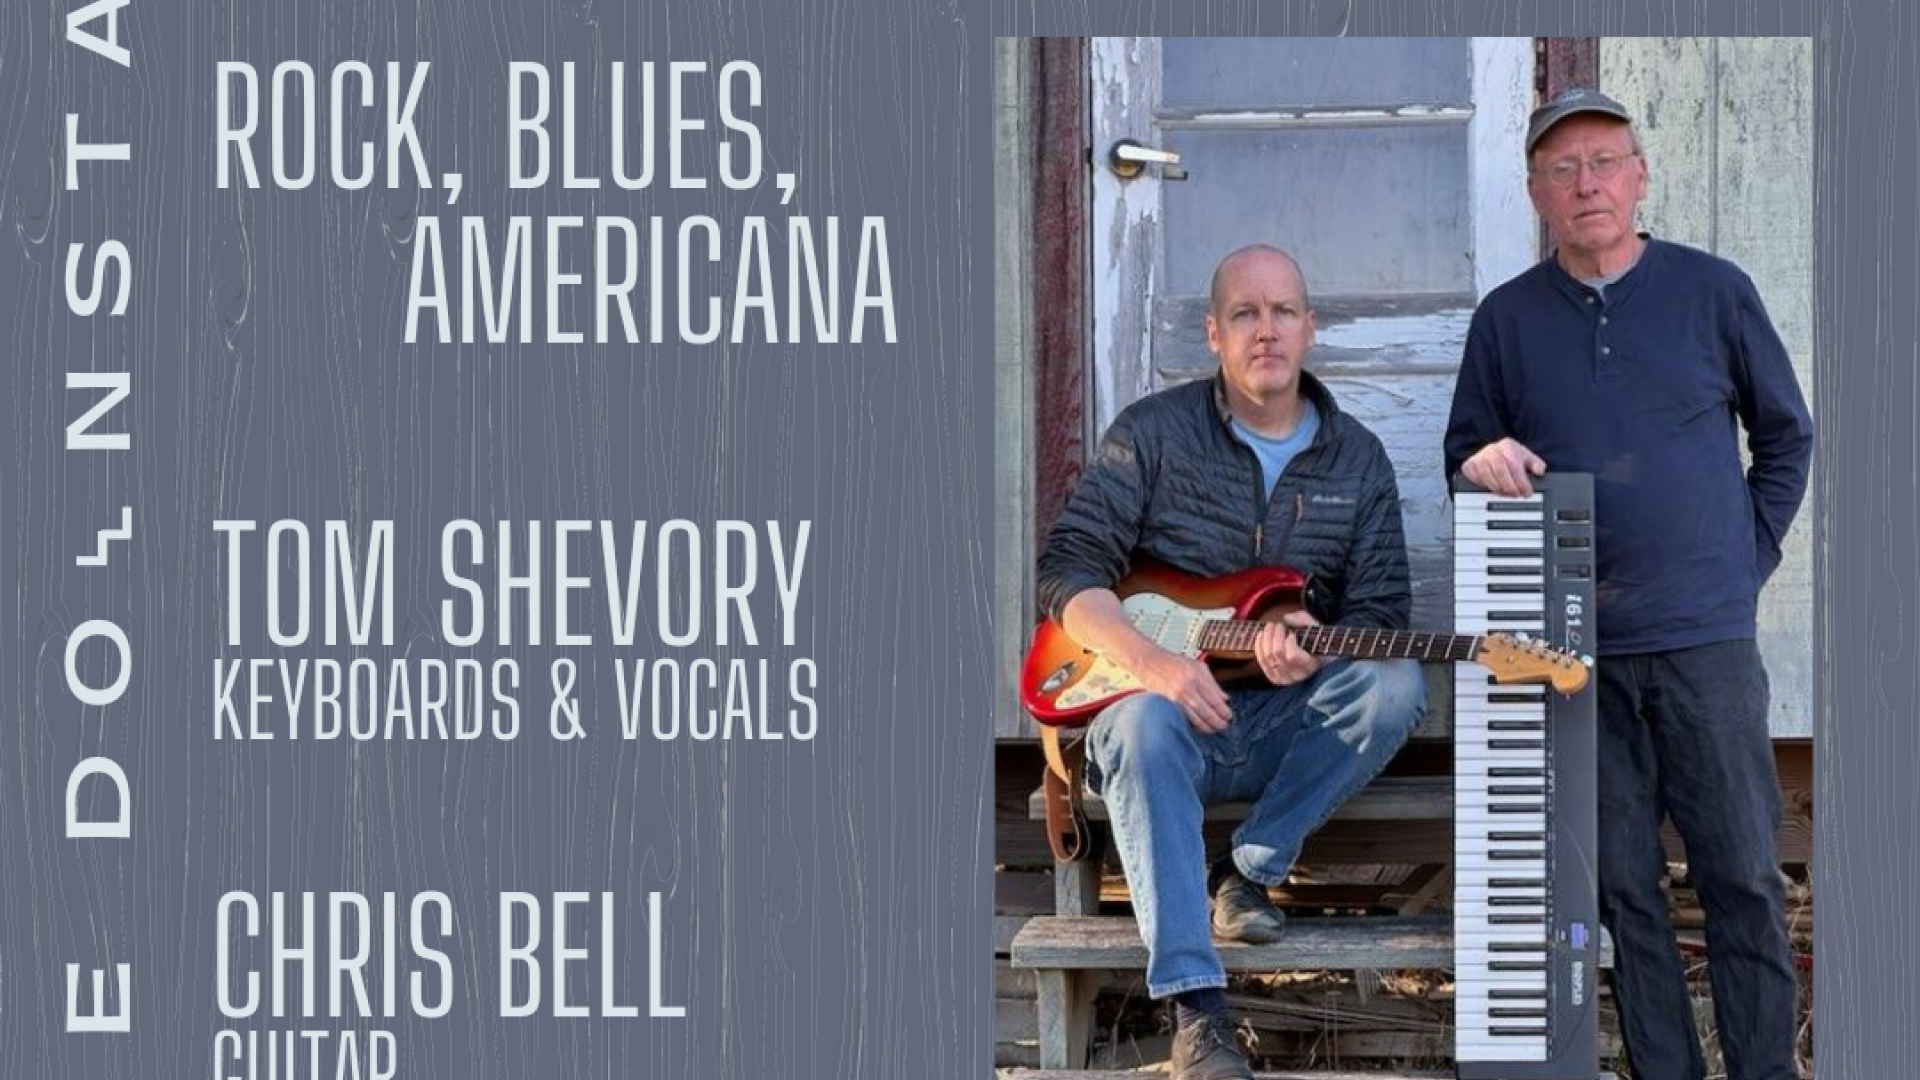 Shevory and Bell; Rock, Blues, and Americana 